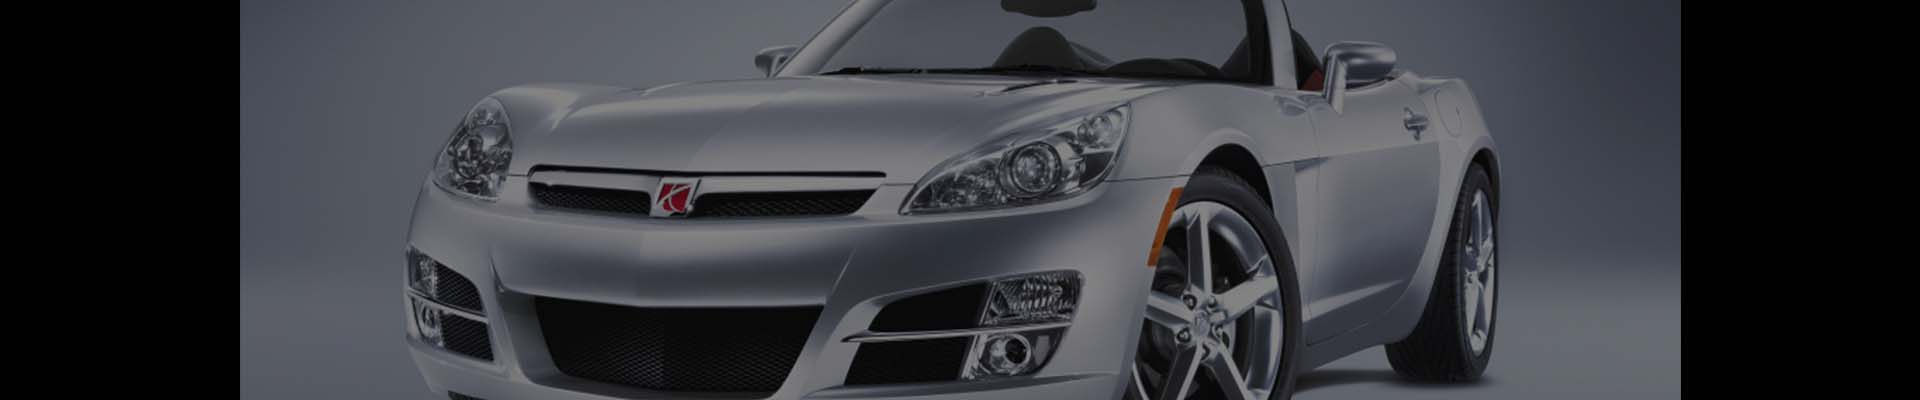 Shop Genuine OE Parts for Saturn Ion